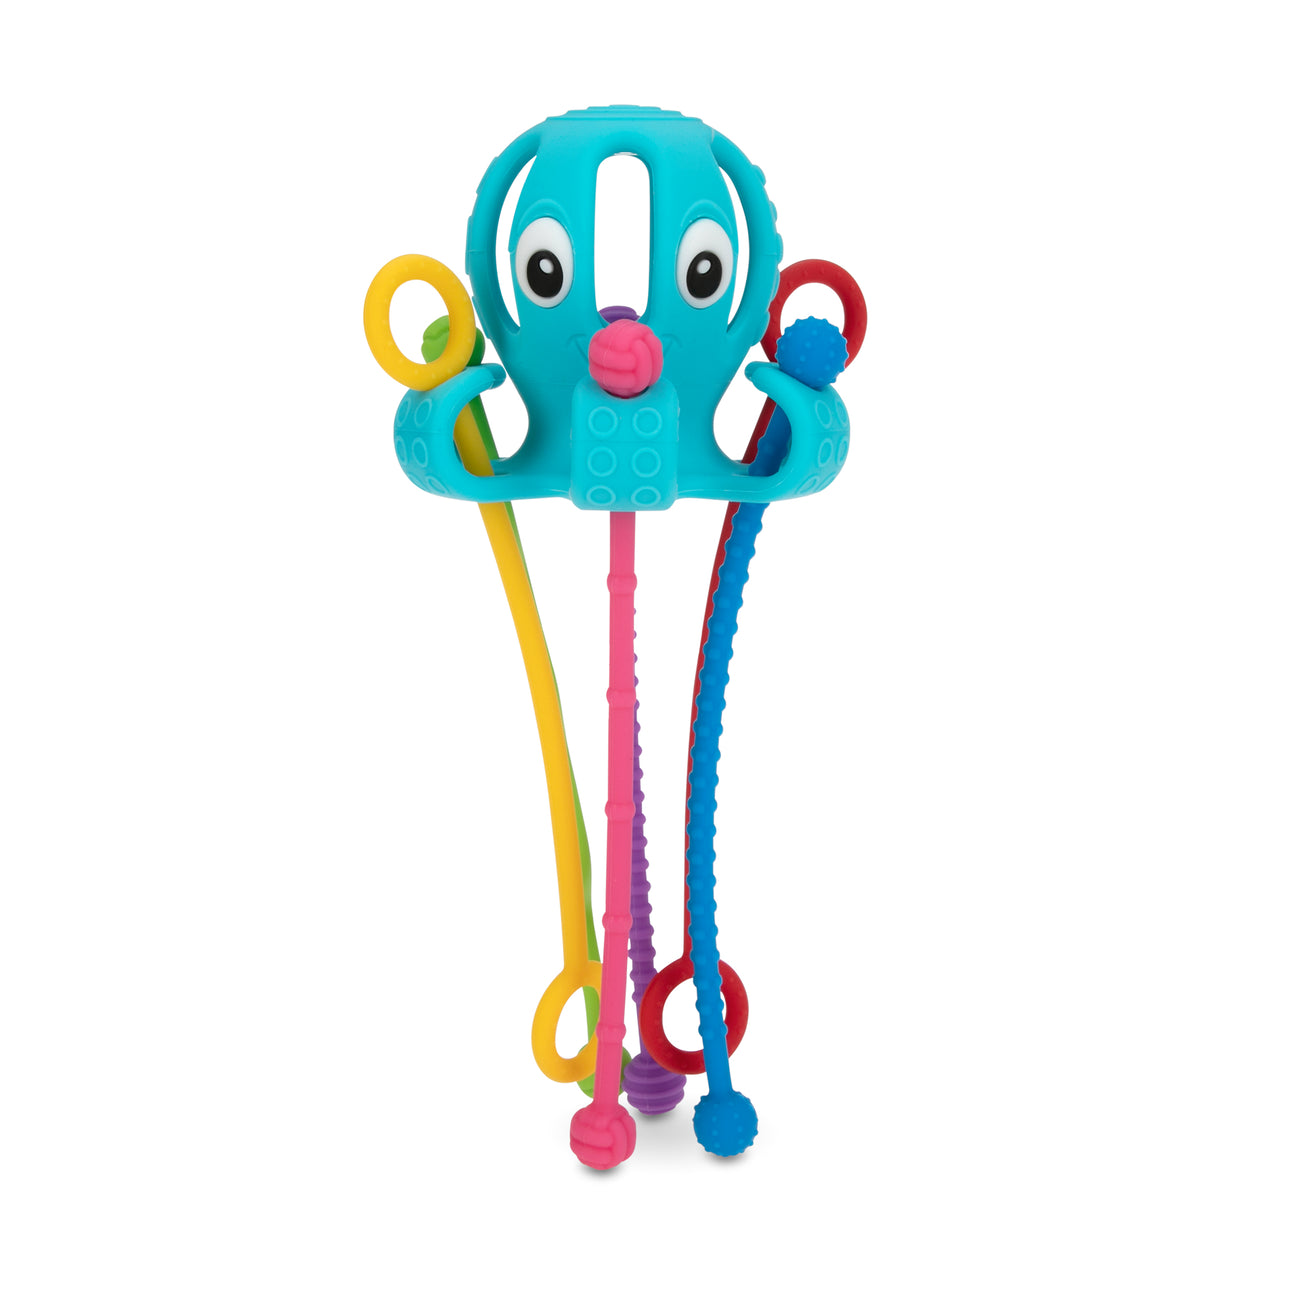 Octopus Silicone Toy - Nuby US